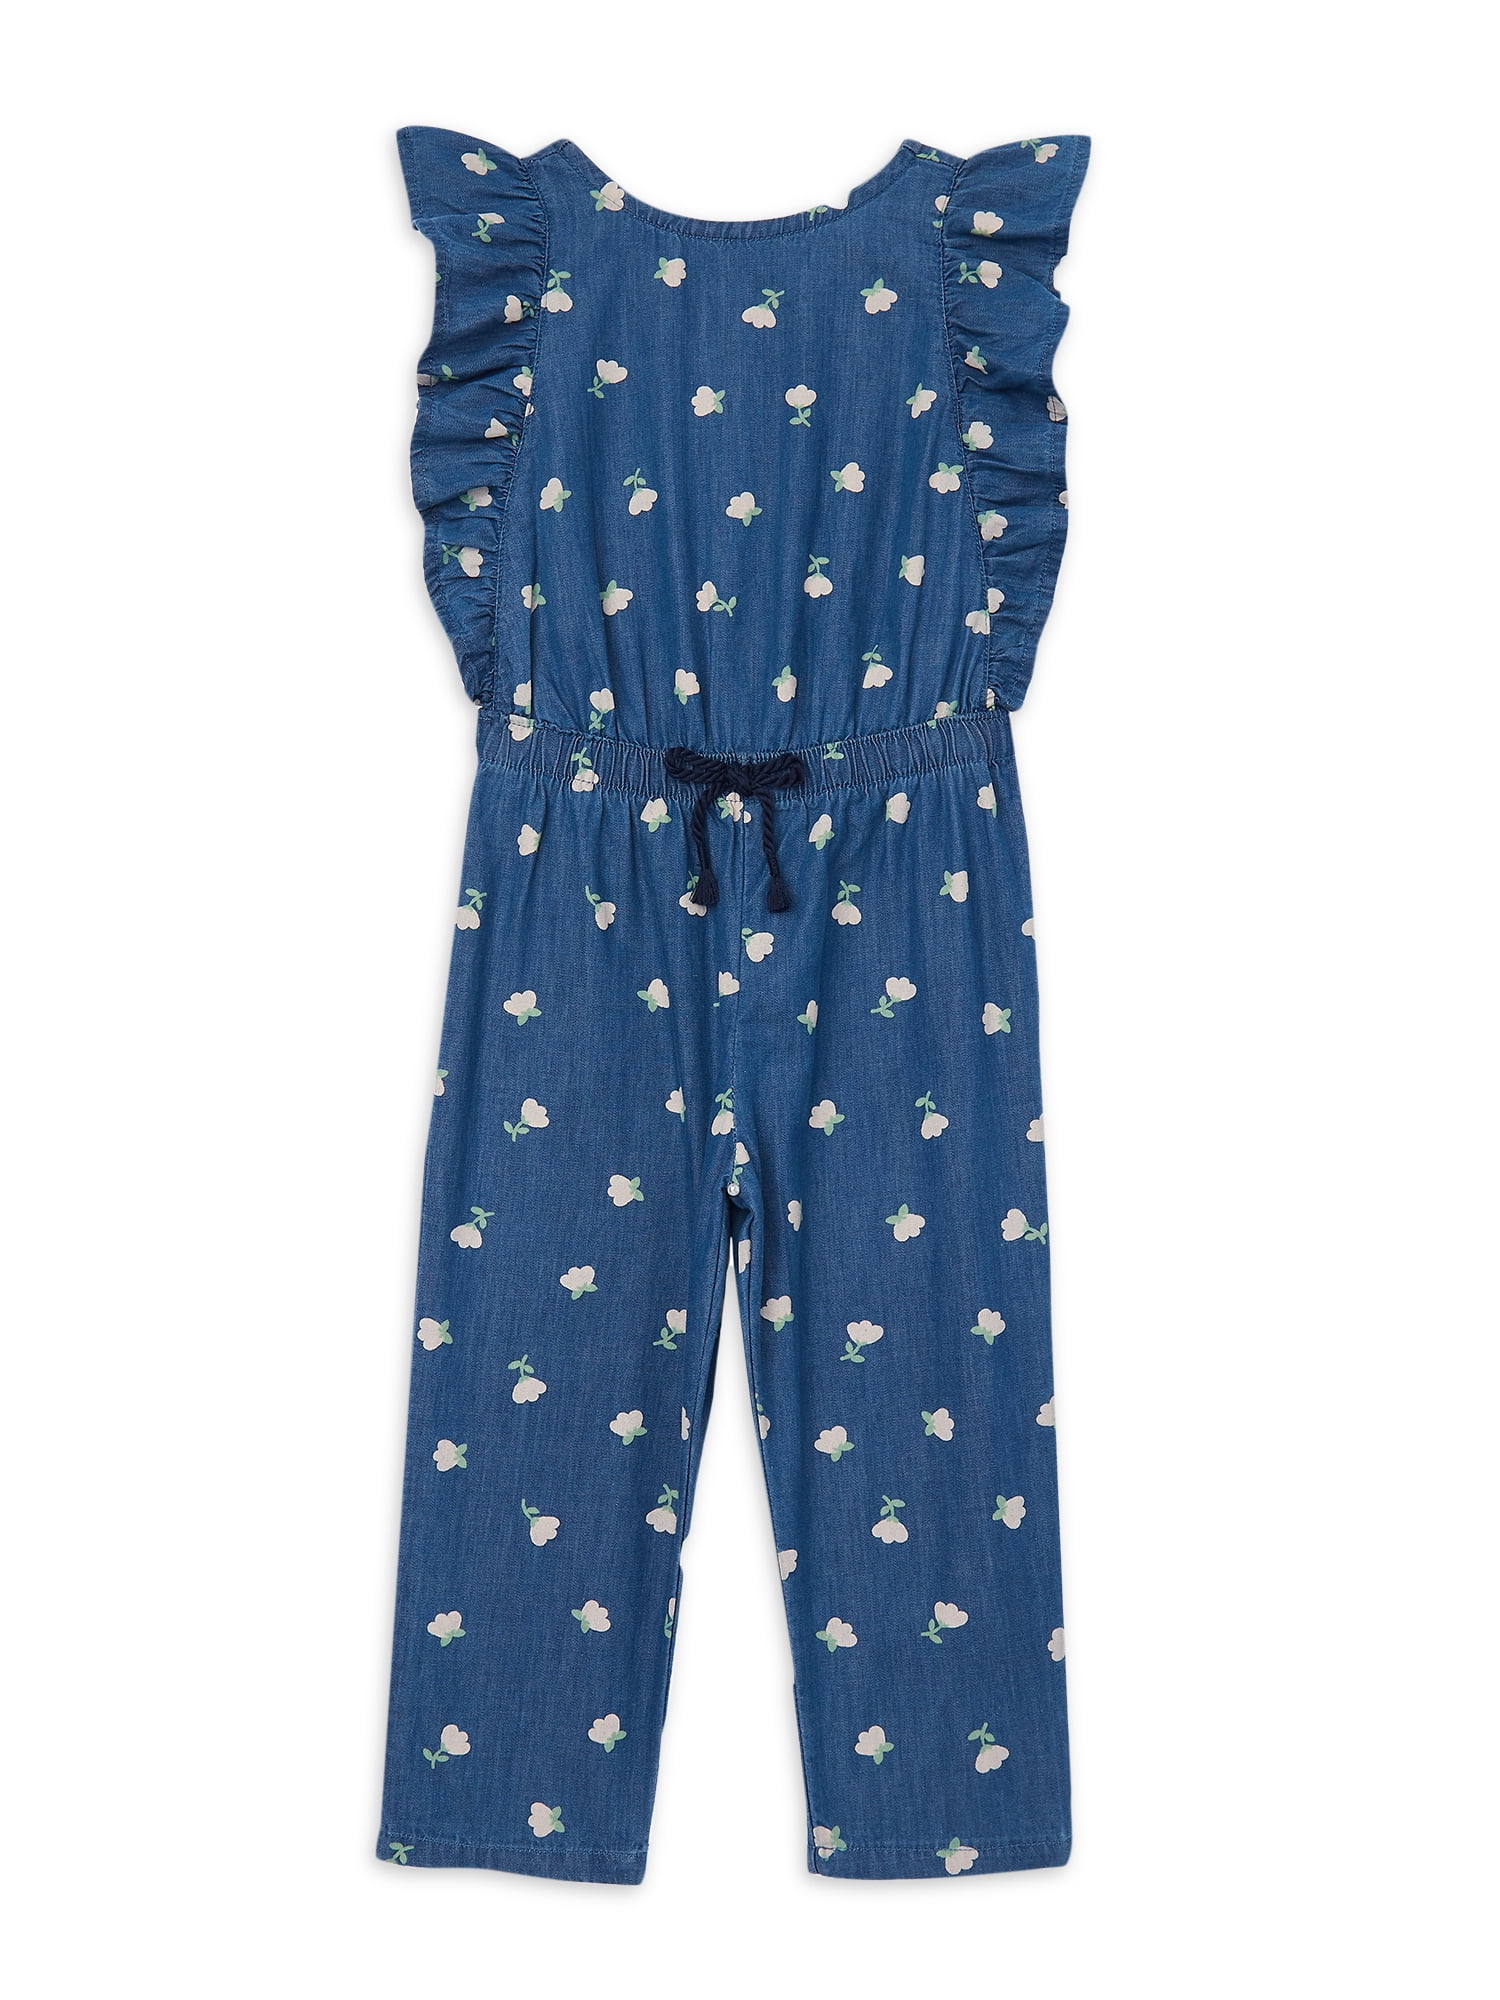 easy-peasy Baby and Toddler Girl Jumpsuit, Sizes 12 Months-5T